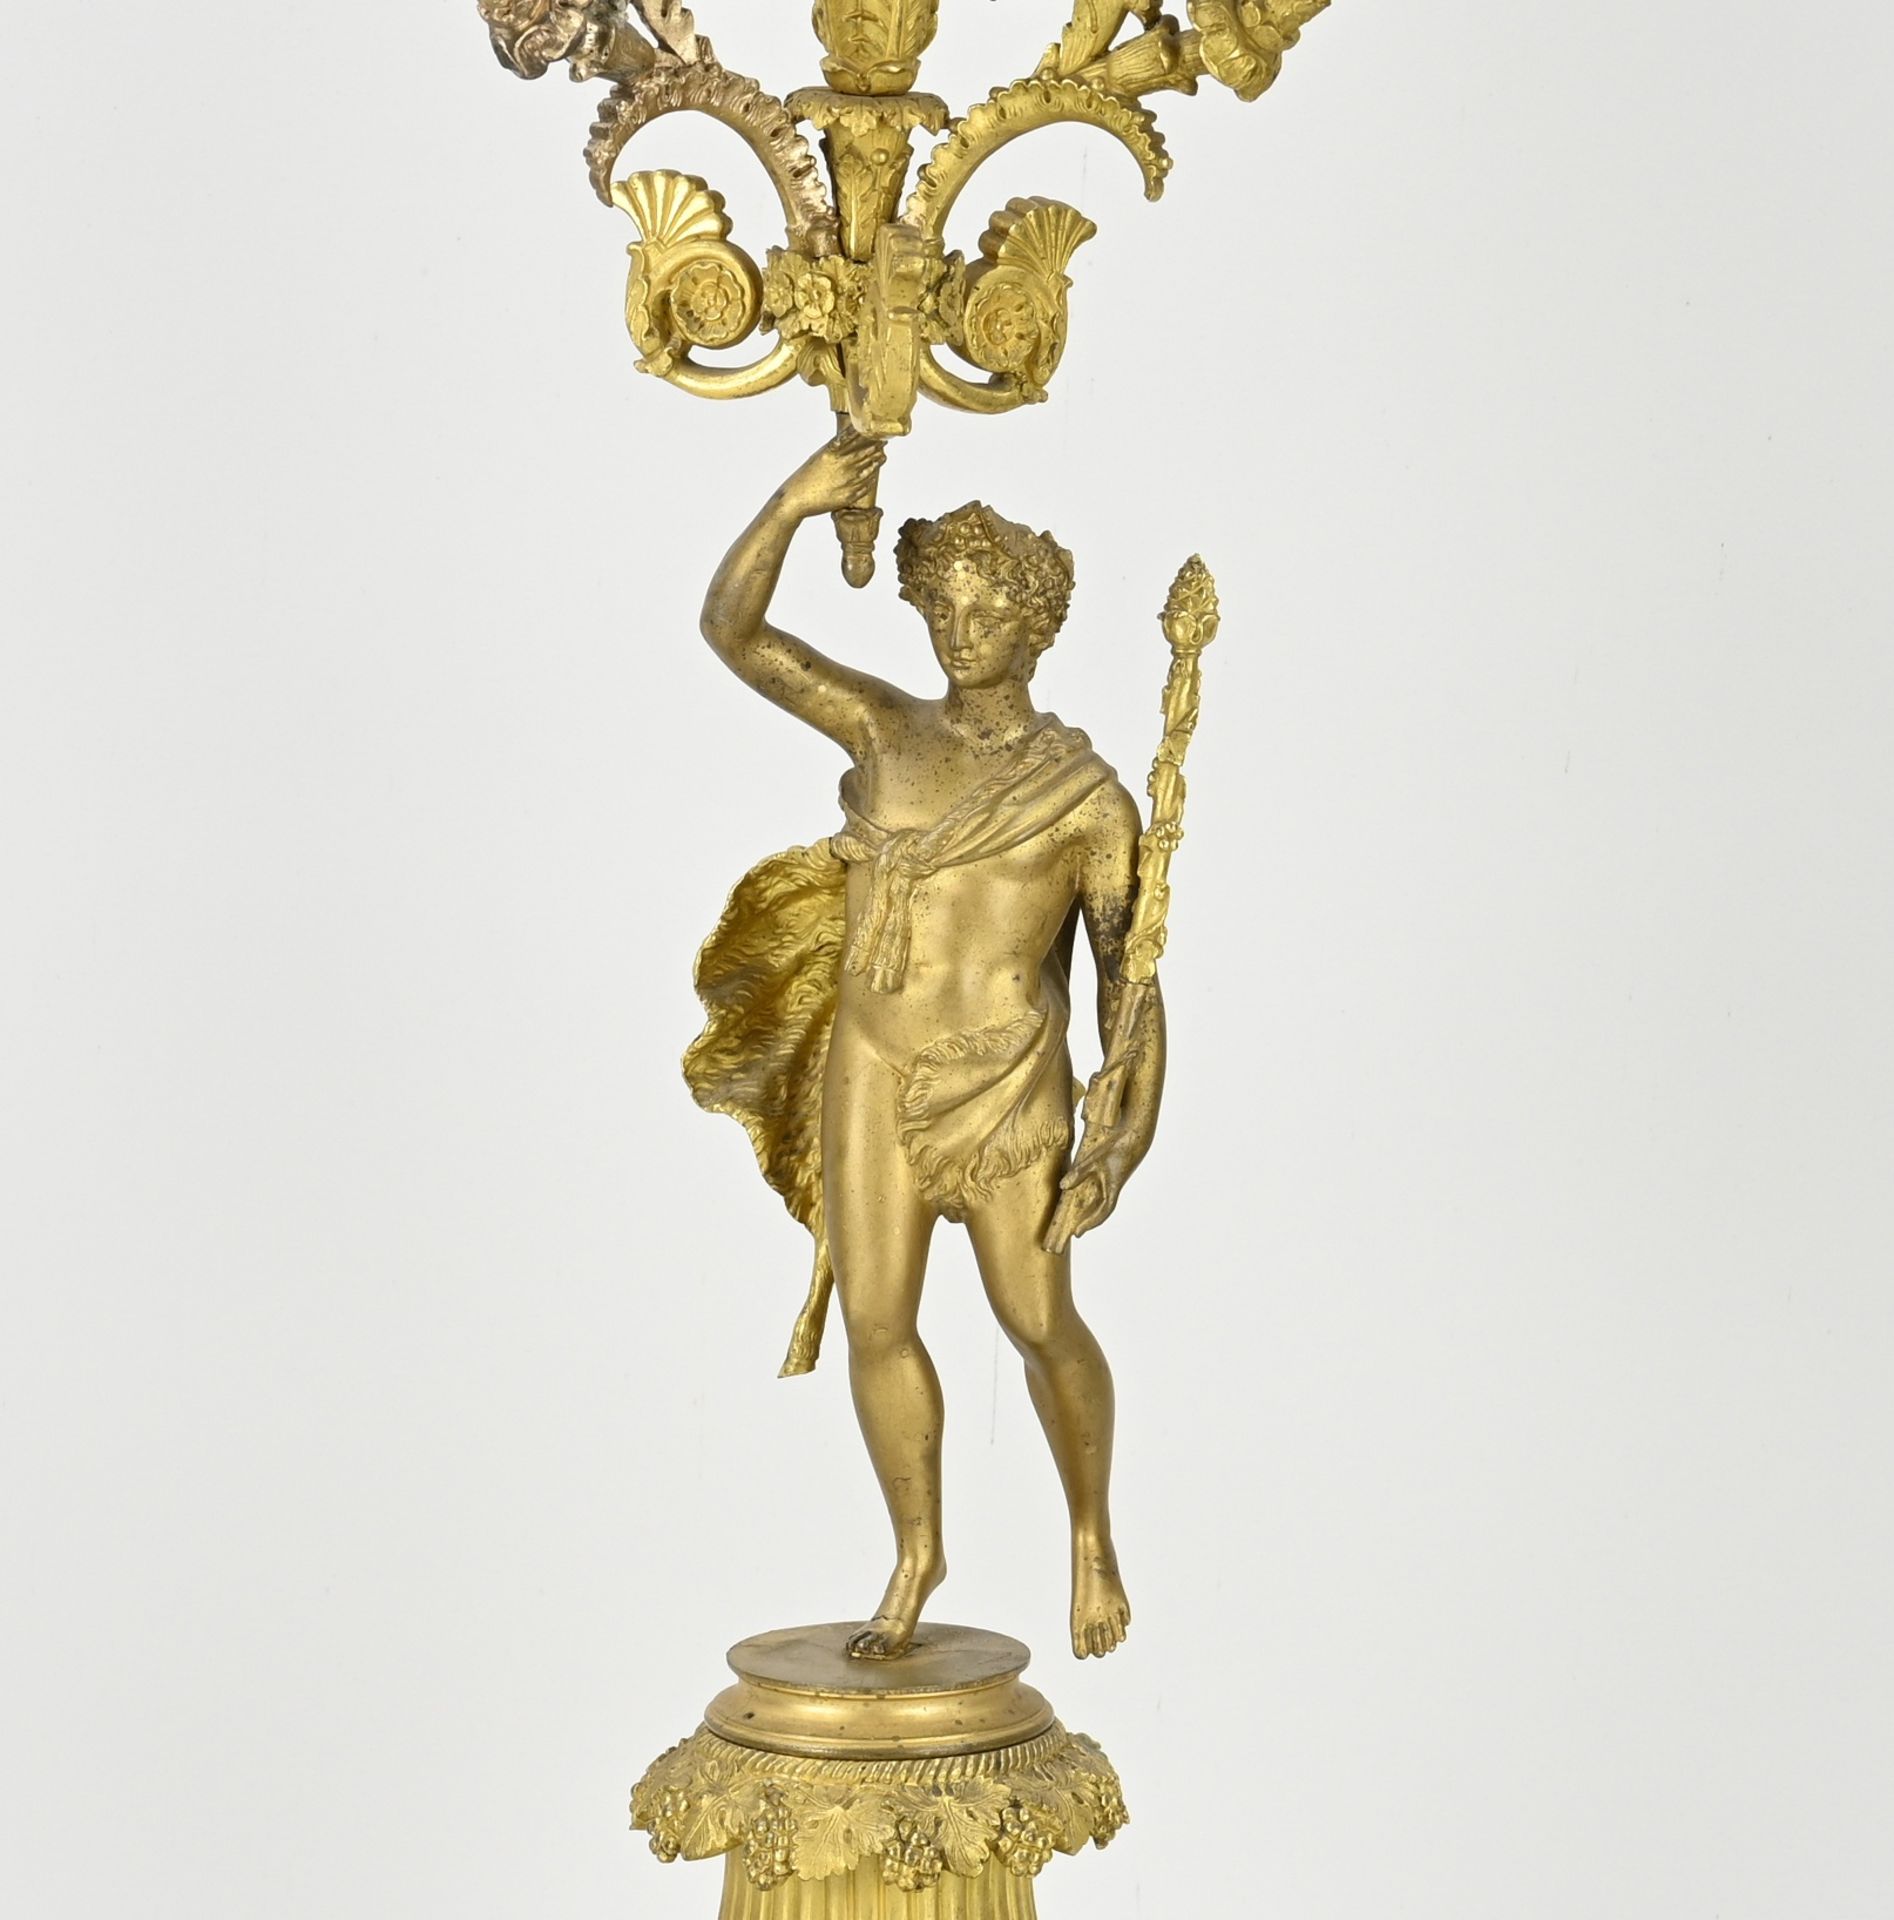 Large French Empire candlestick, H 57 cm. - Image 3 of 3